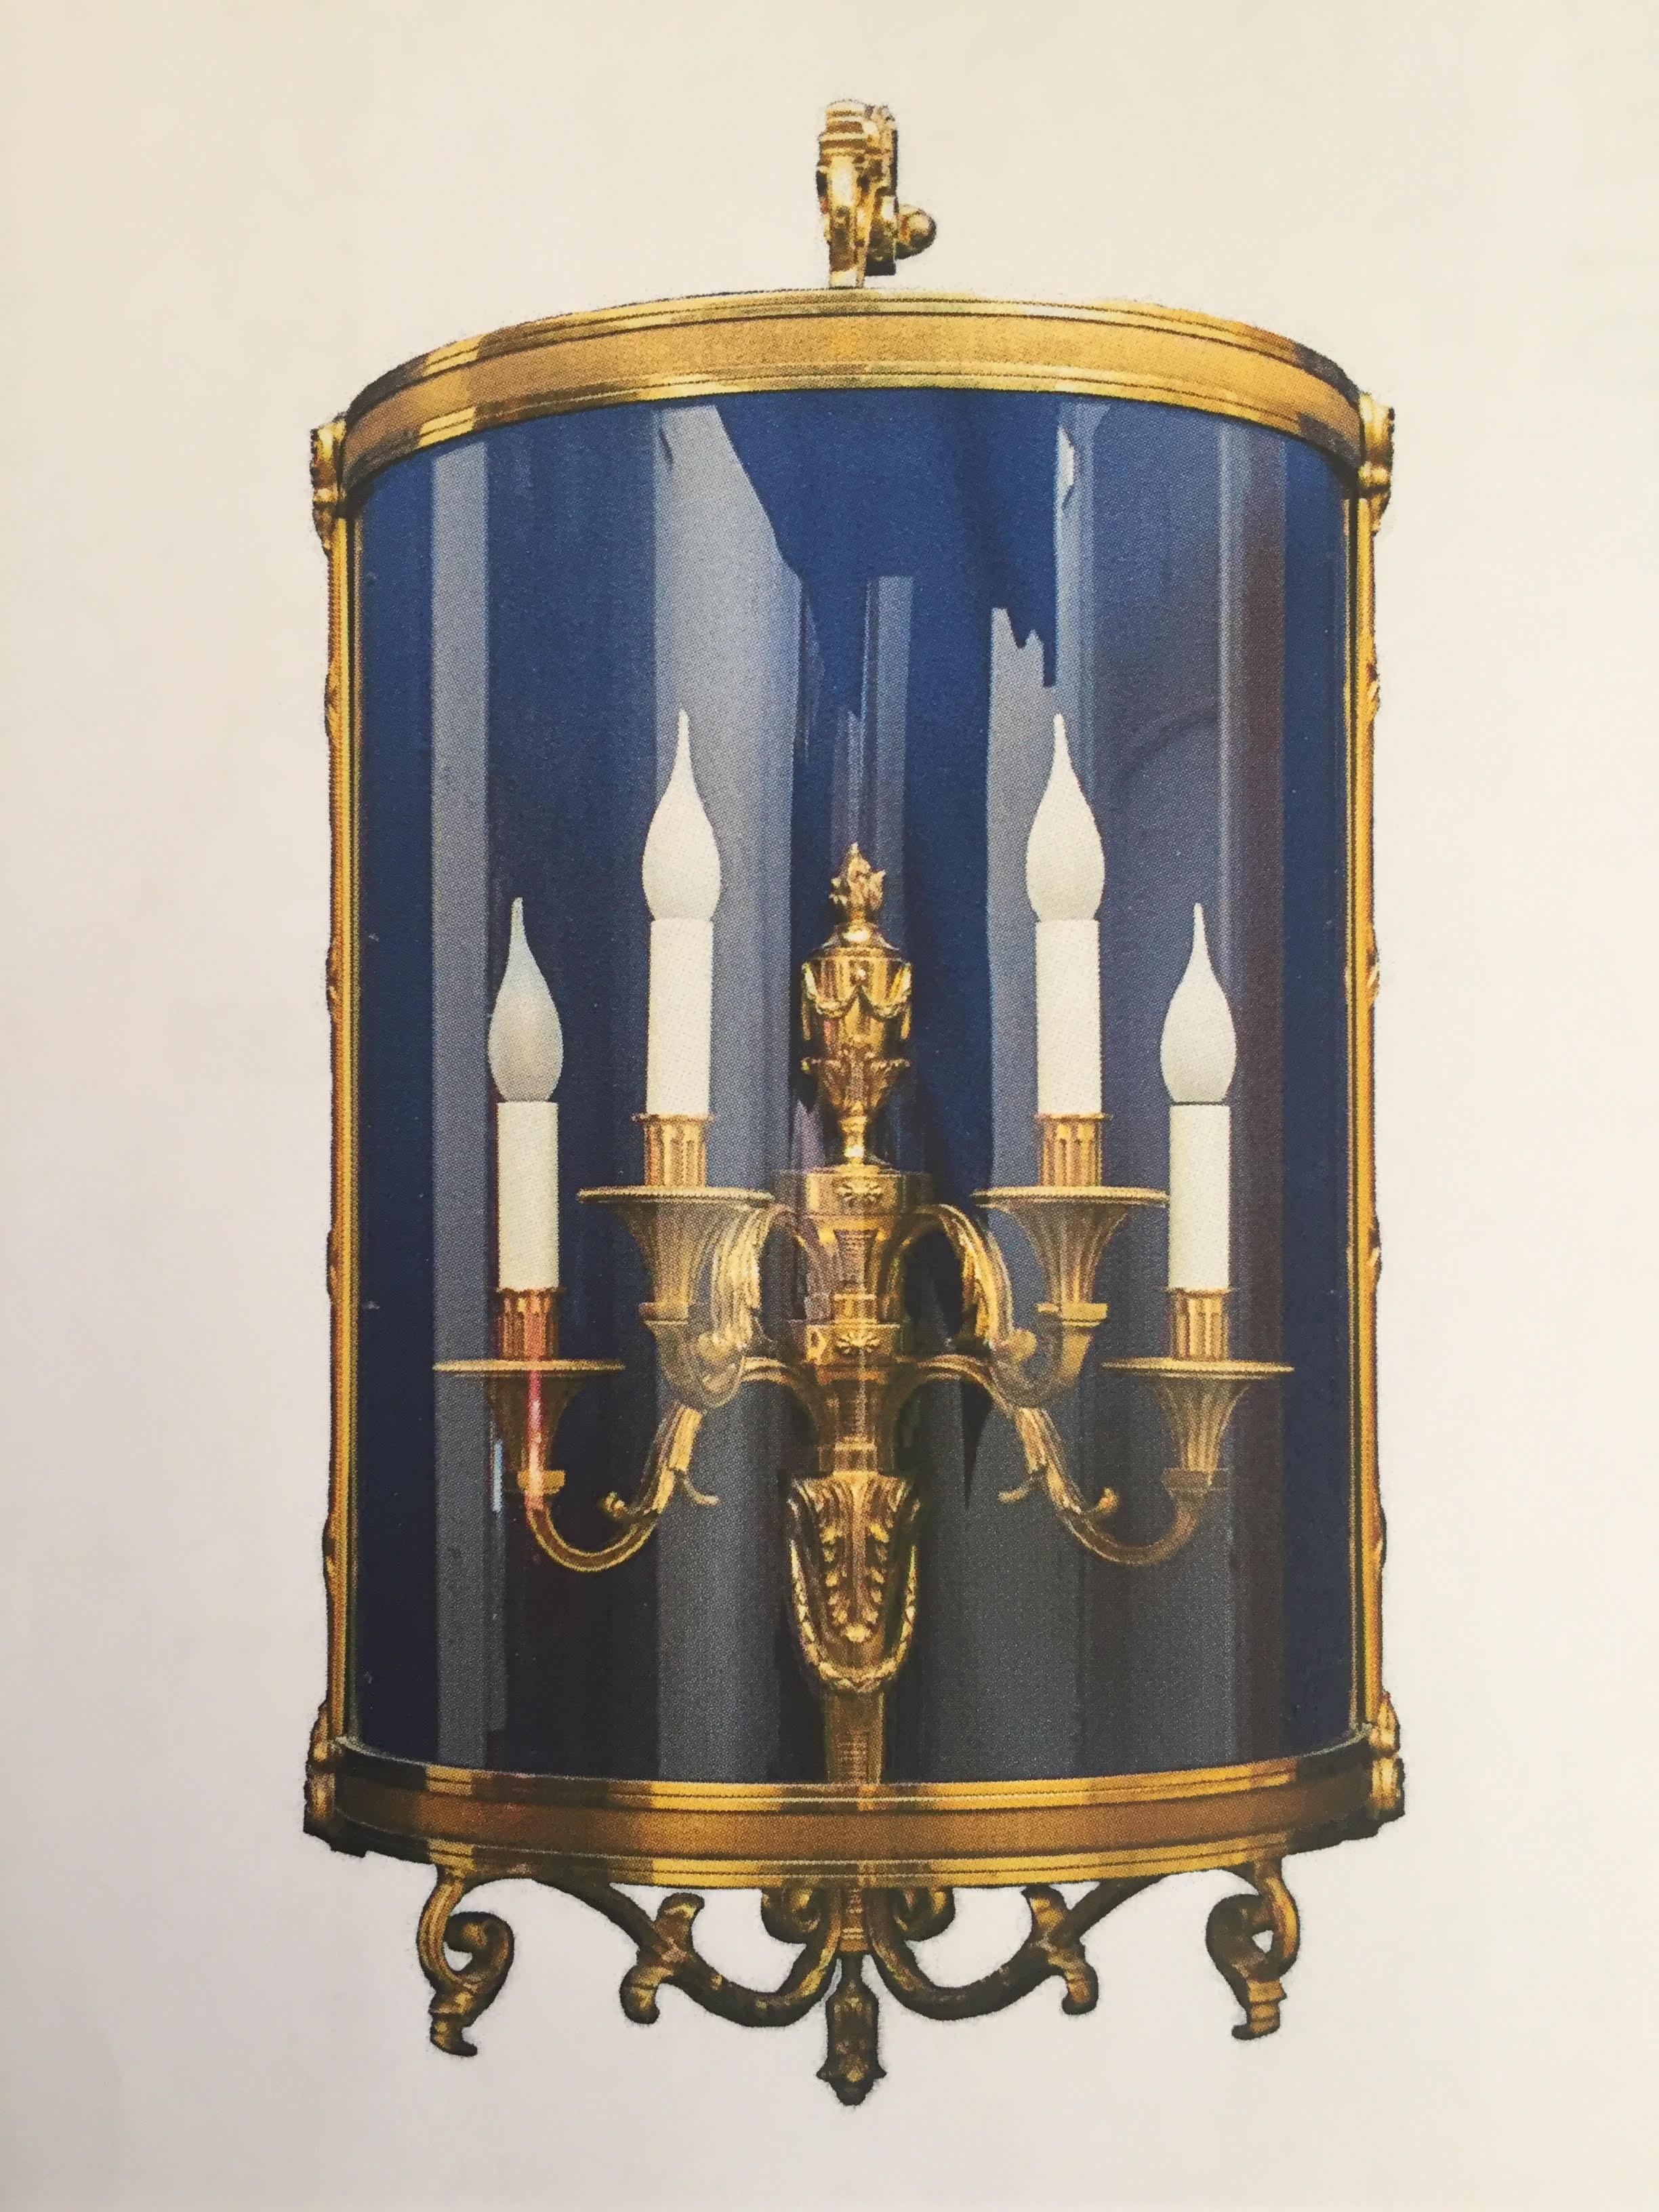 This old gold finish wall sconce represents a half lantern with four lights. The carvings and fine details make it an exceptional Classic piece.